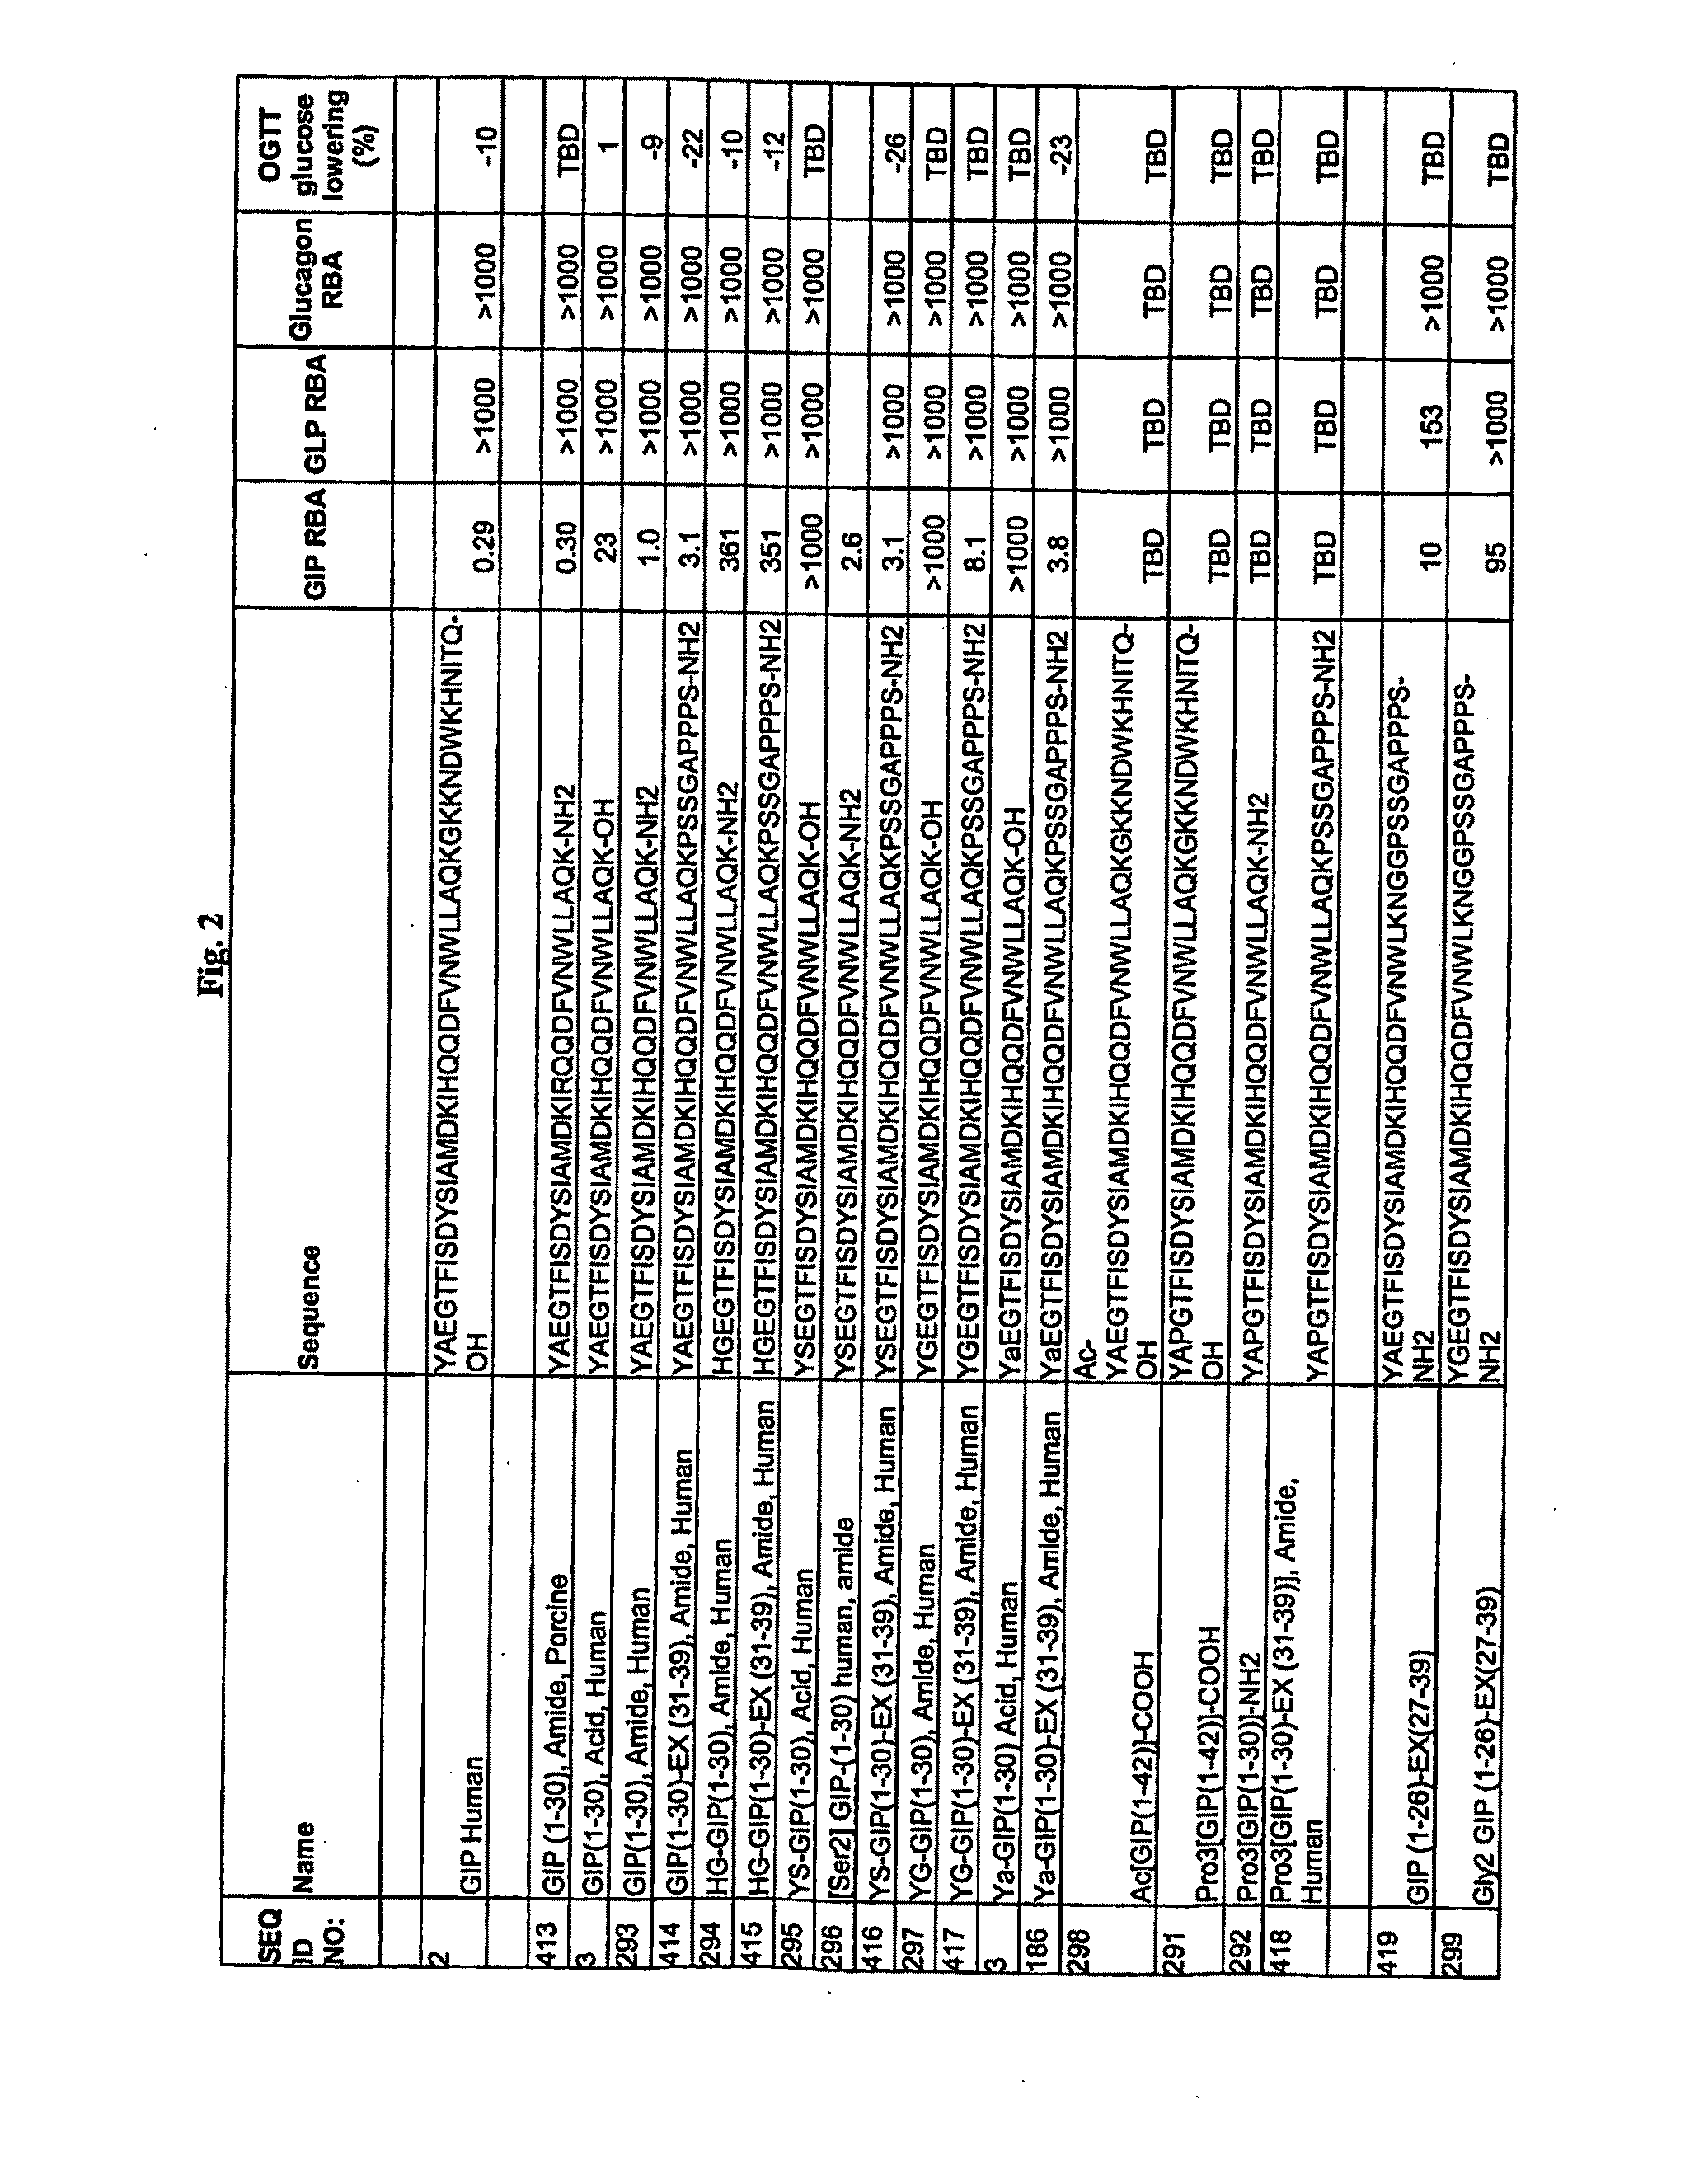 DPP-IV Resistant GIP Hybrid Polypeptides with Selectable Properties